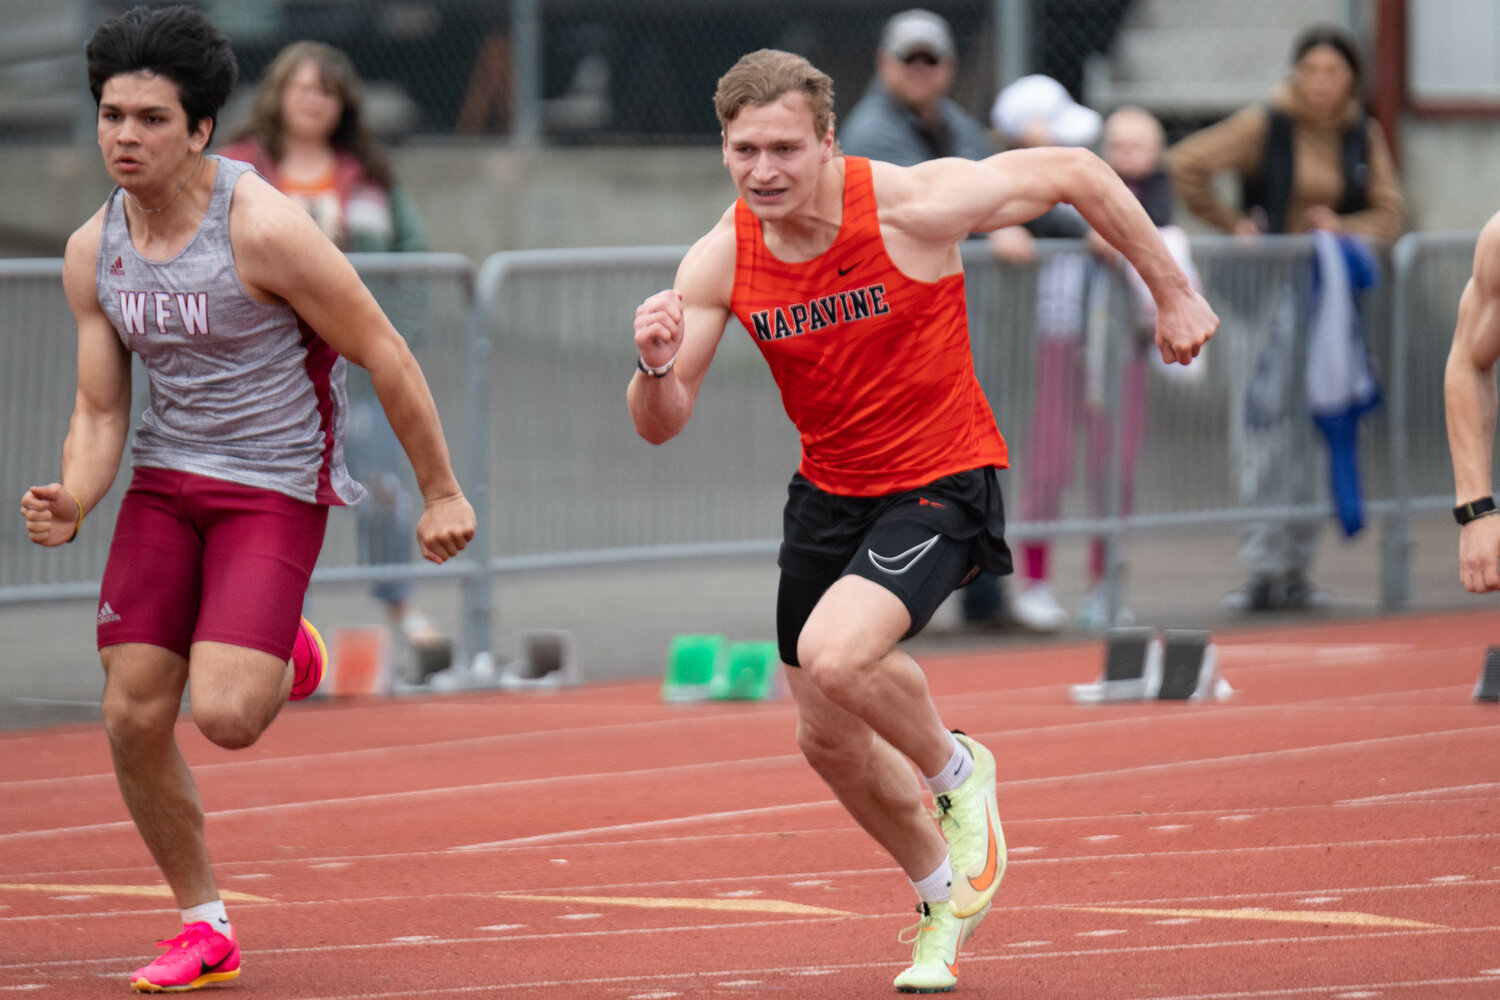 Napavine's Max O'Neill gets out of the blocks in the boys 100-meter dash, with W.F. West's Declan McDonald next to him, at the Chehalis Activator on April 22.